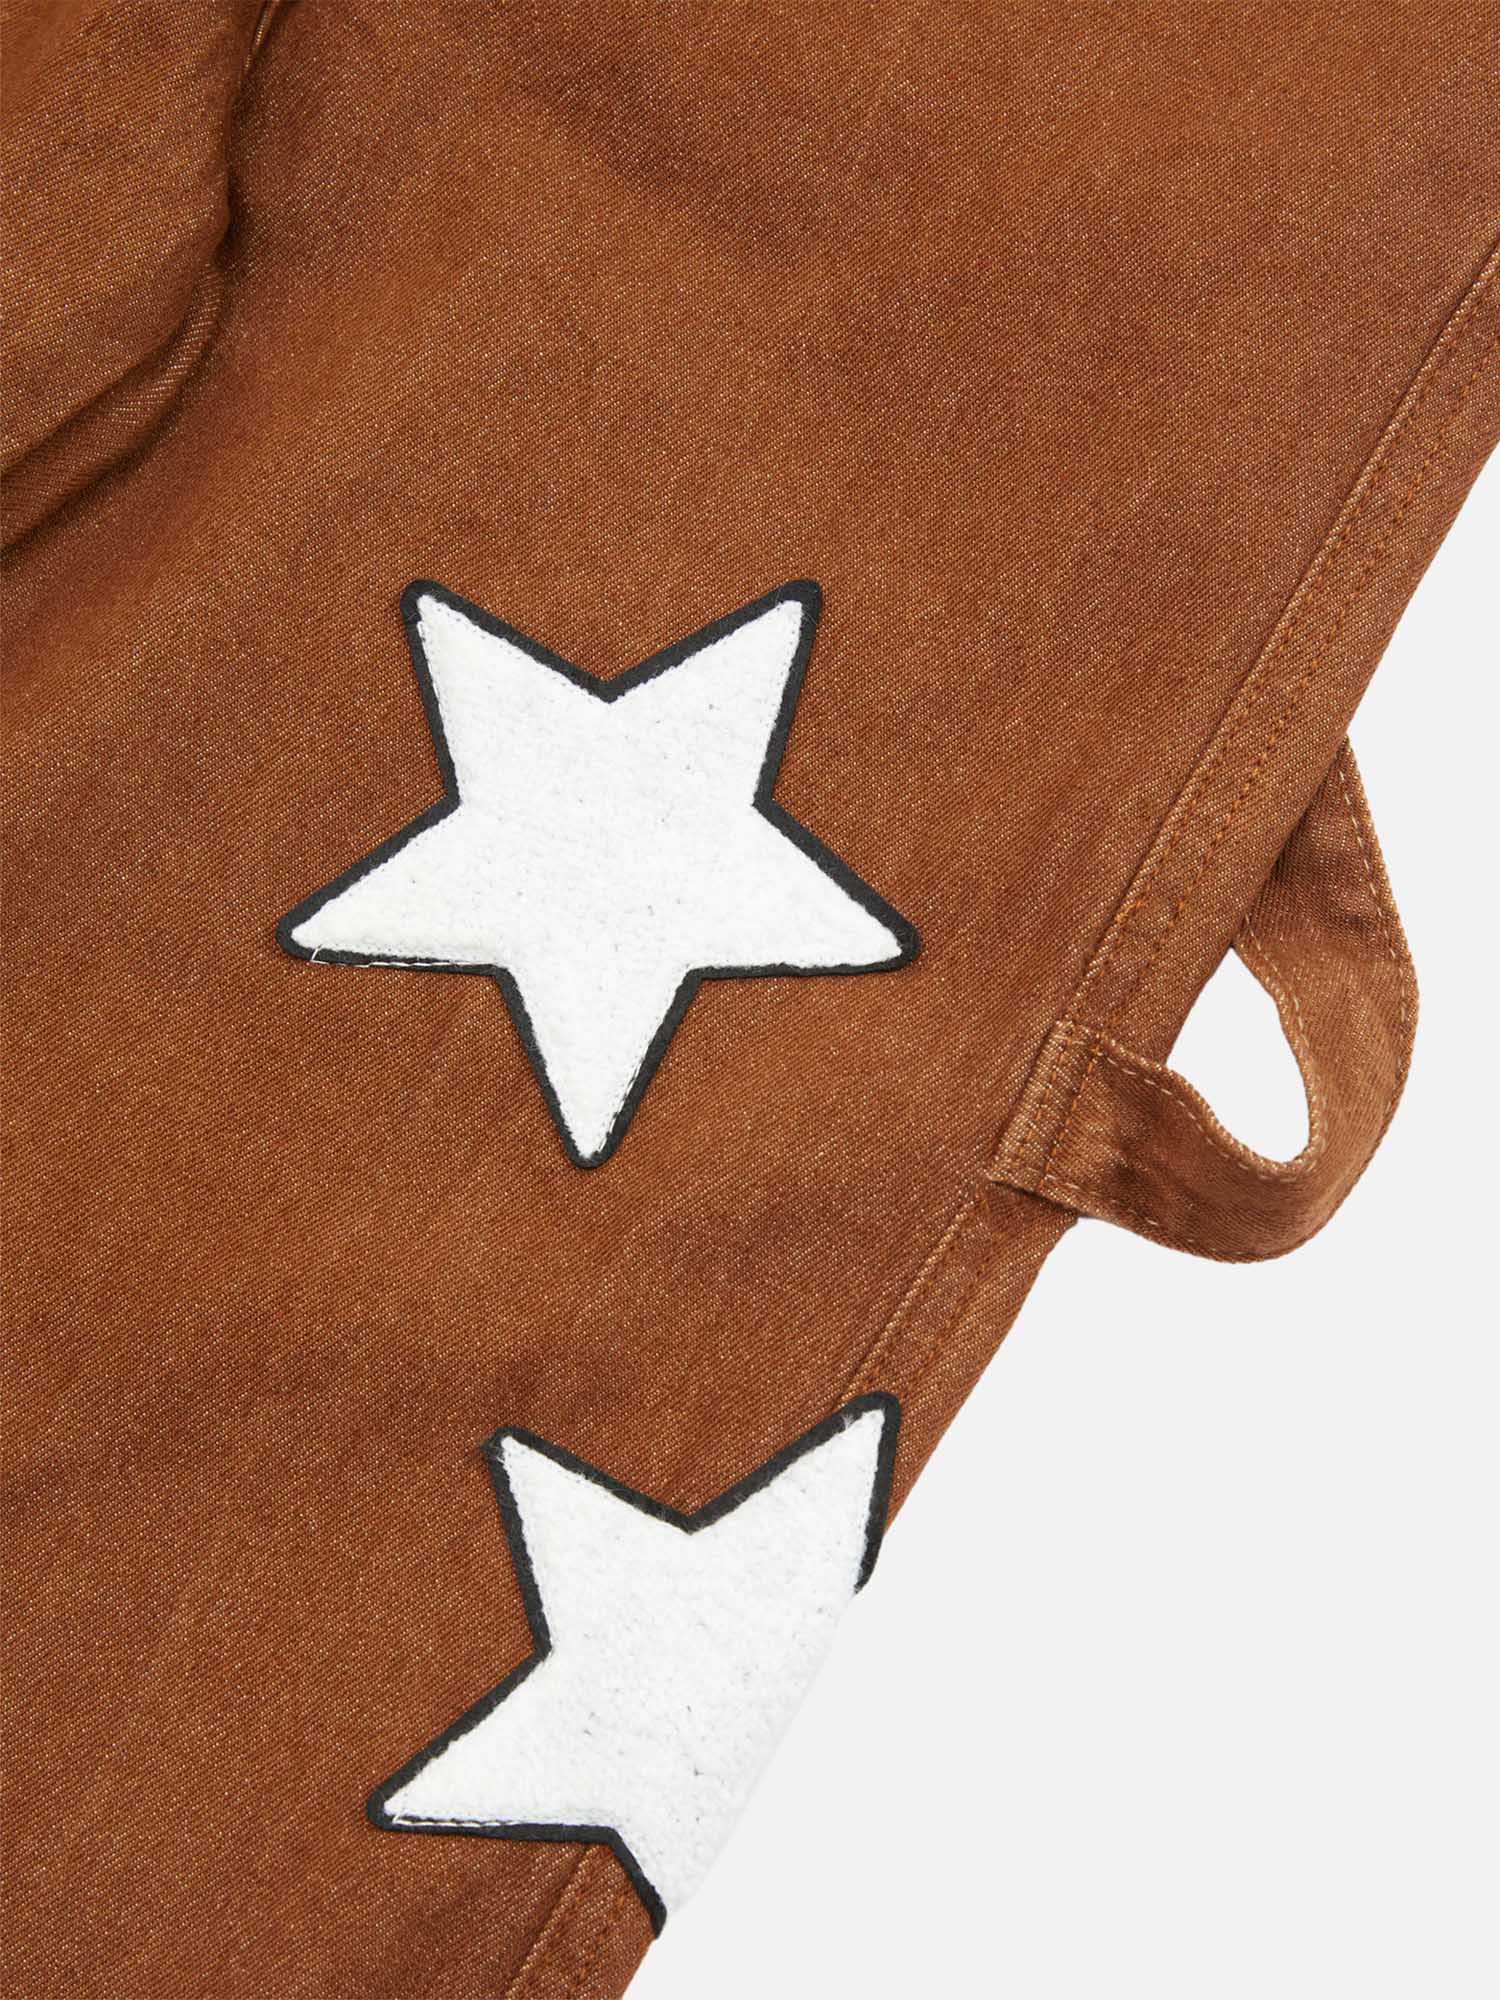 Thesupermade American Retro Embroidered Five-pointed Star Jeans